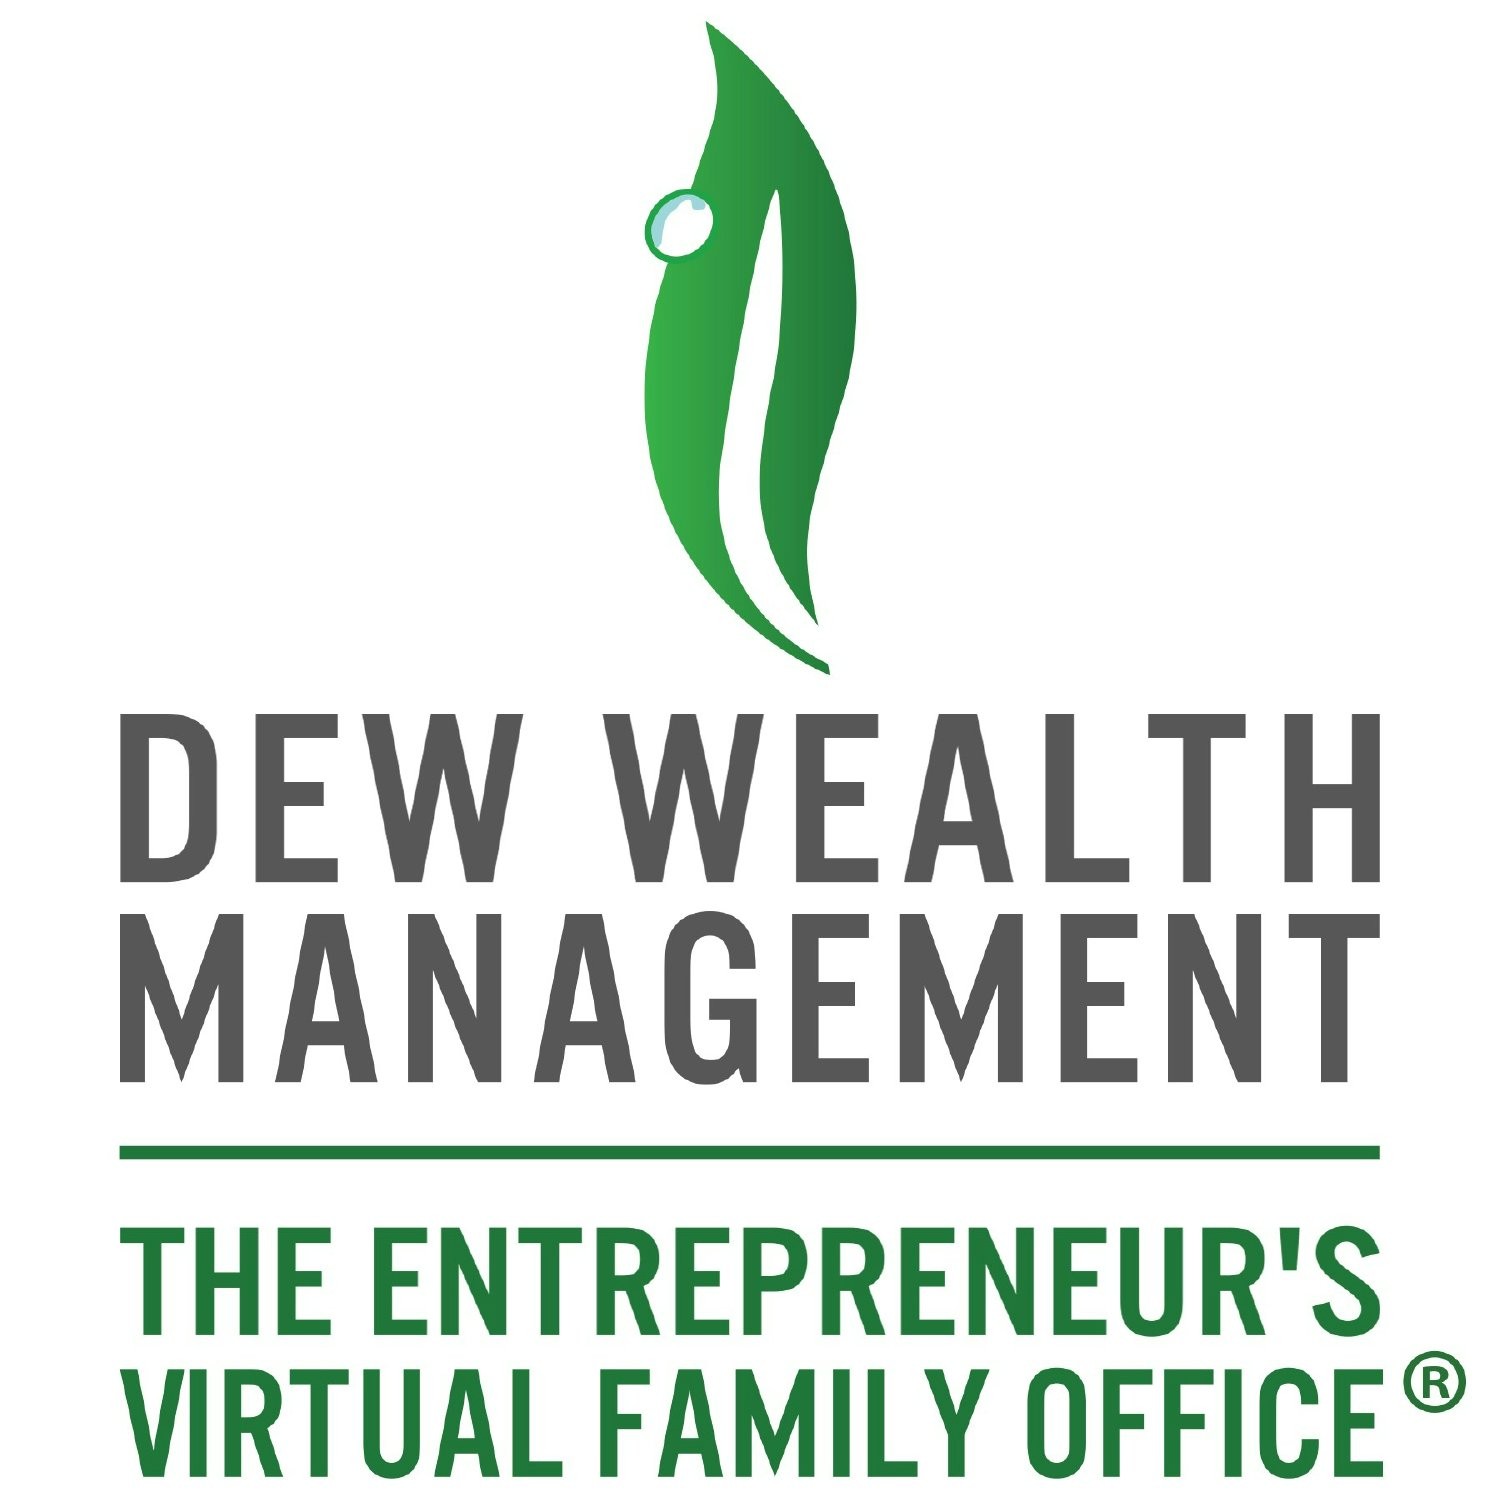 We are The Entrepreneur's Virtual Family Office